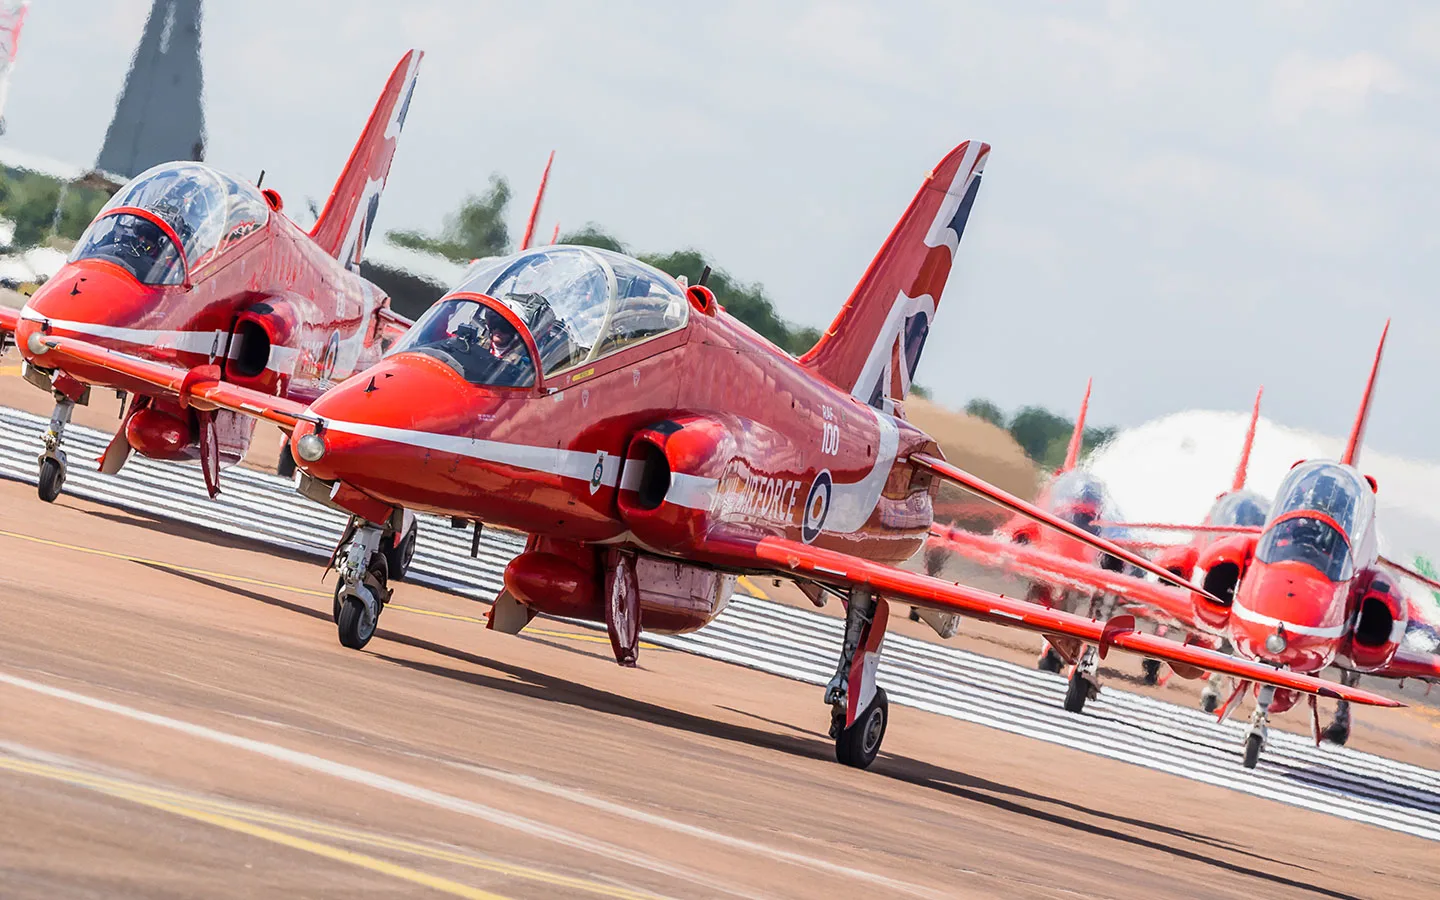 Red Arrows at the Royal International Air Tattoo